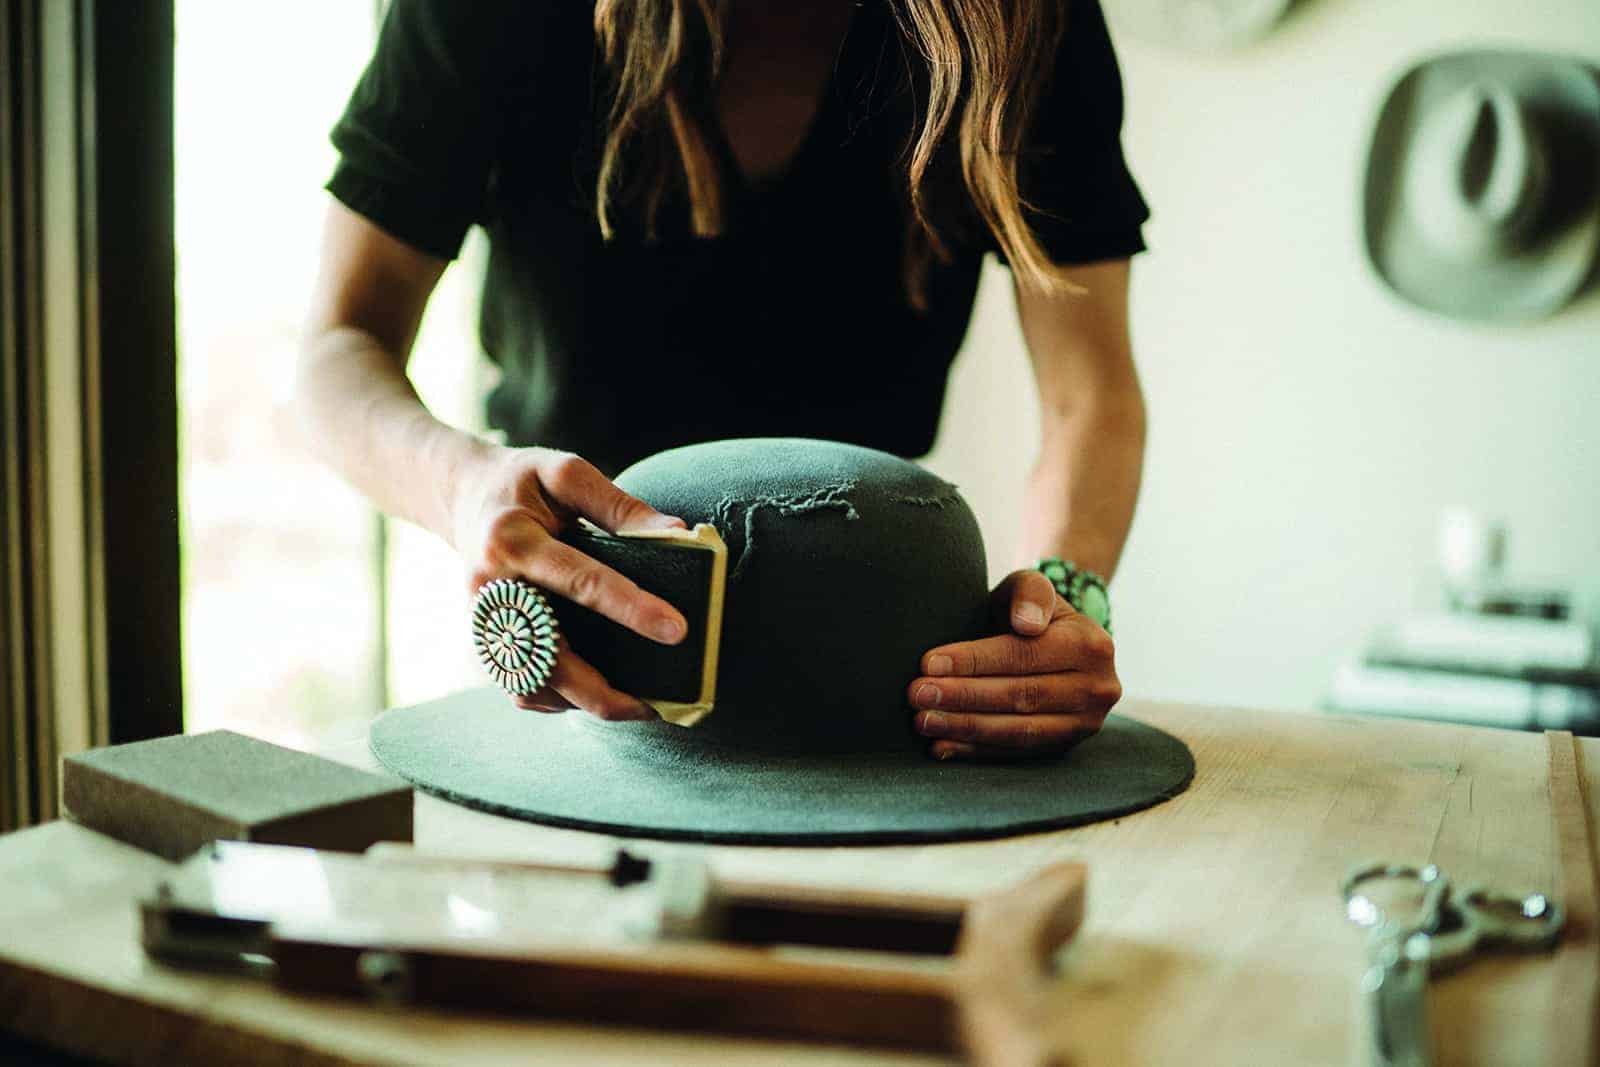 In a rustic western story setting, a woman deftly crafts a hat on a wooden table.